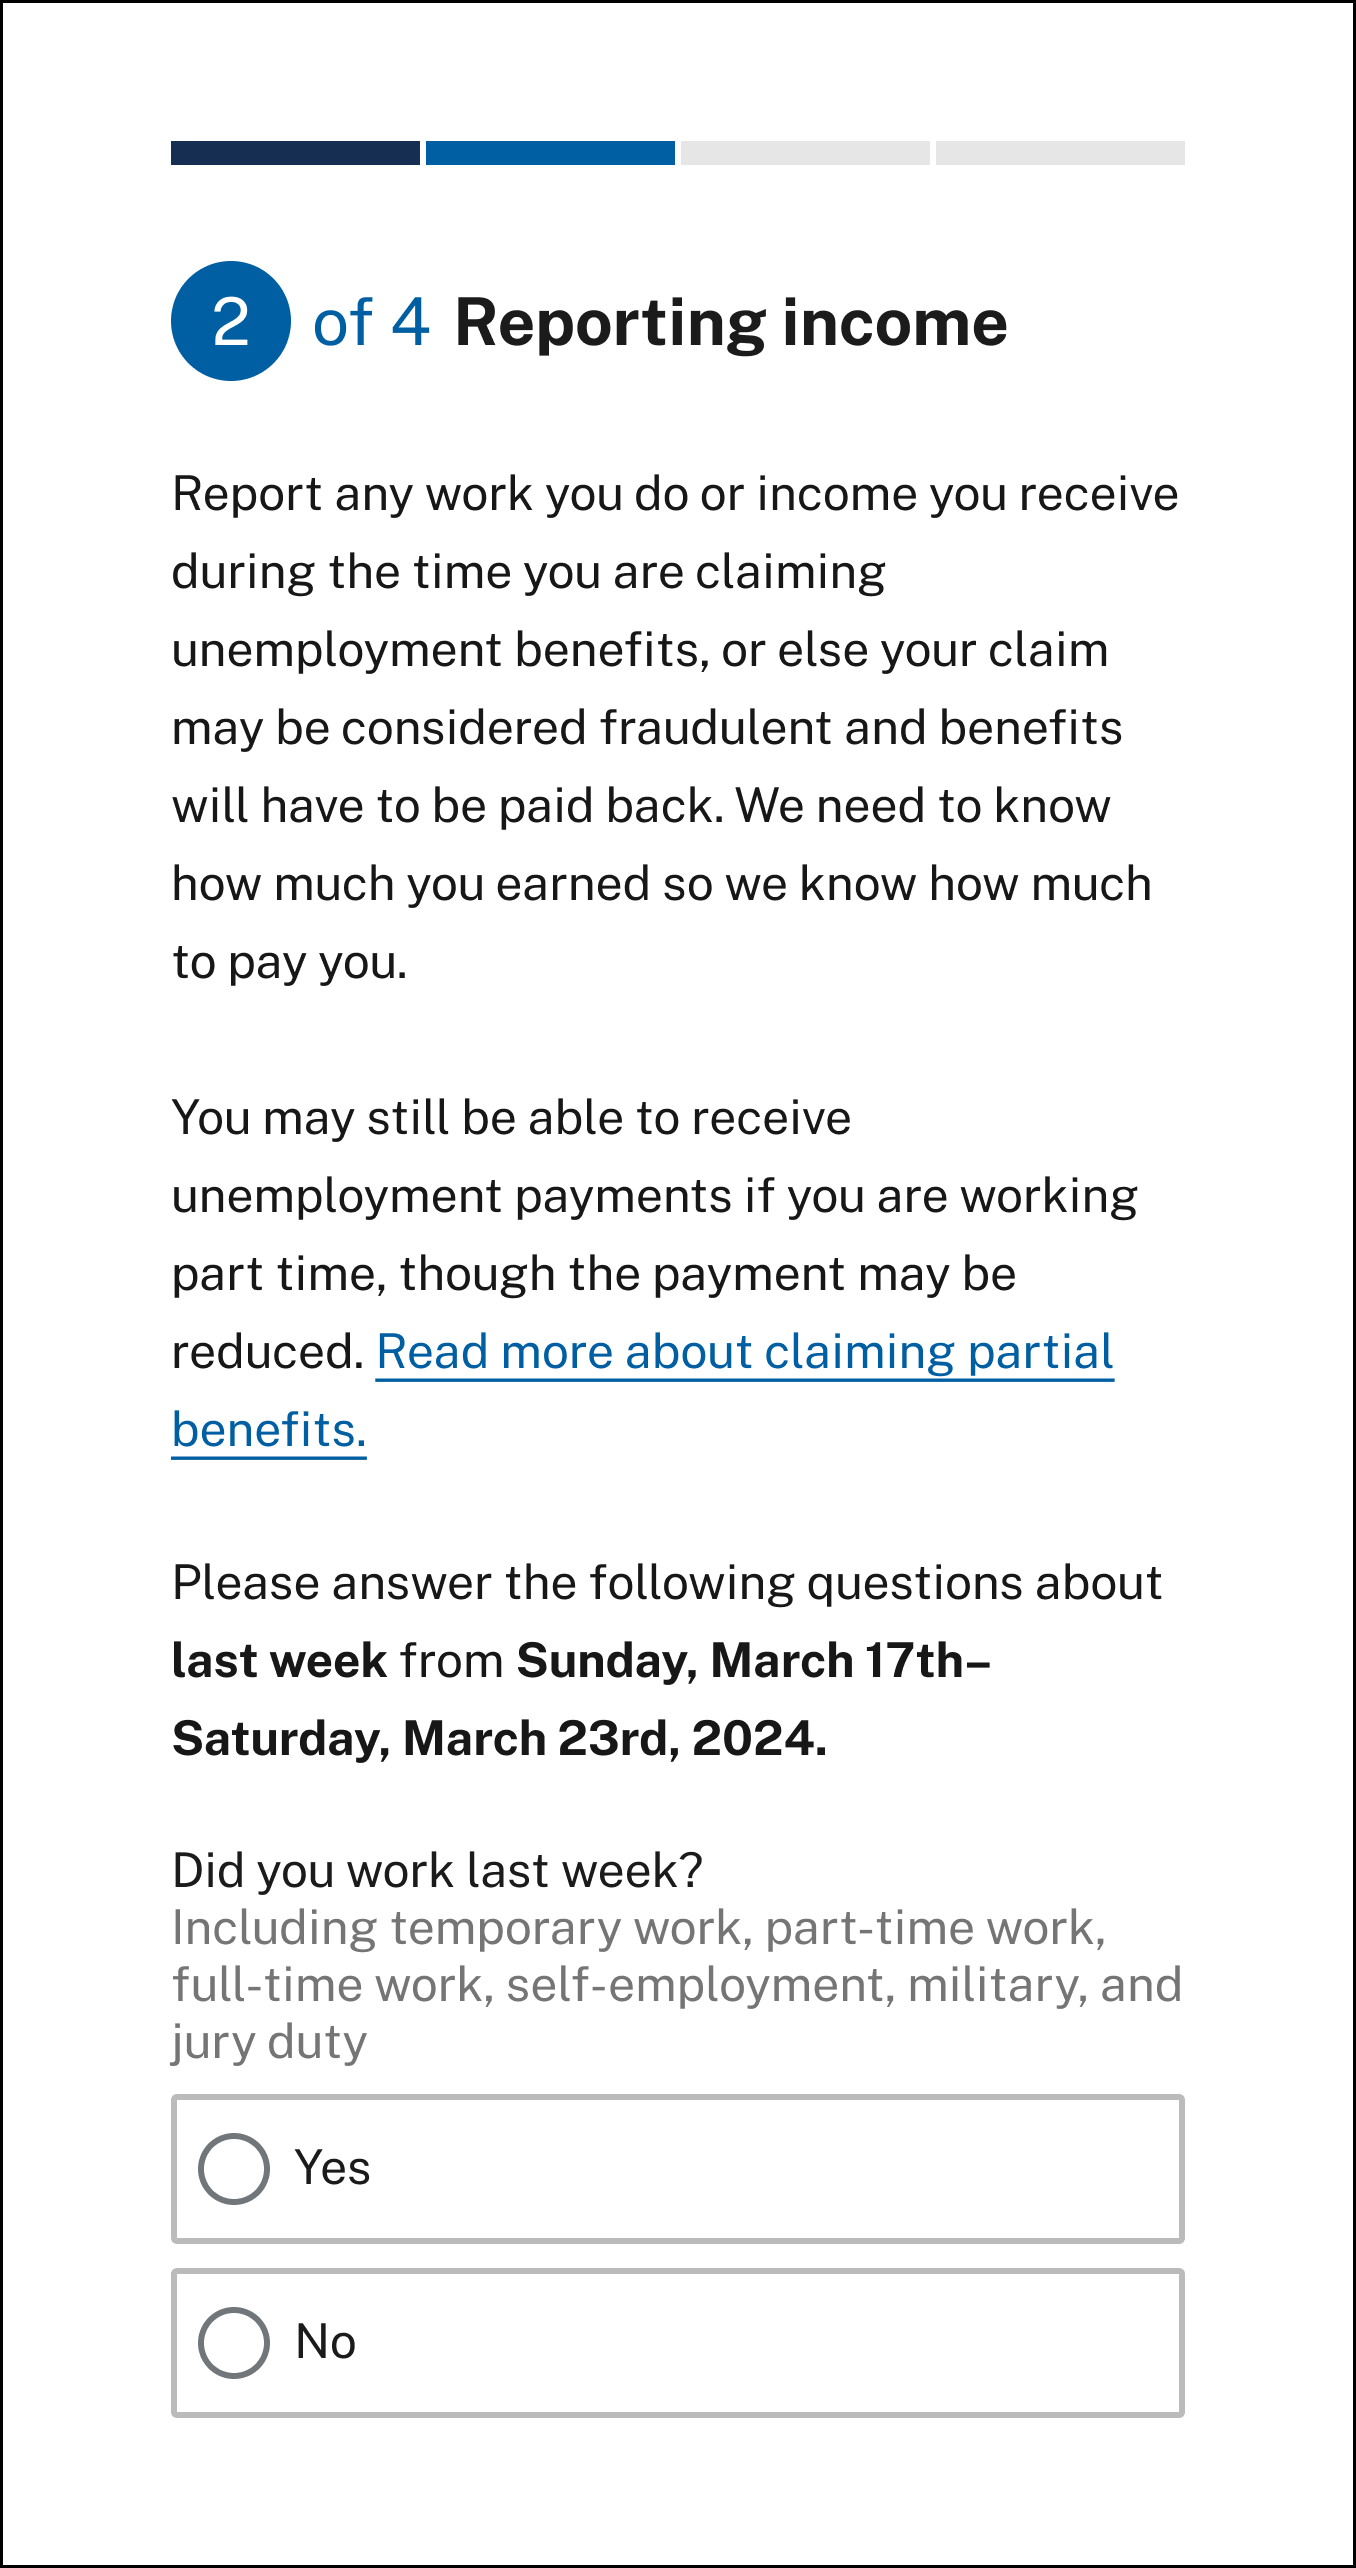 A sample reporting income screenshot for claimants to report any work or income received during the period they are claiming unemployment benefits.